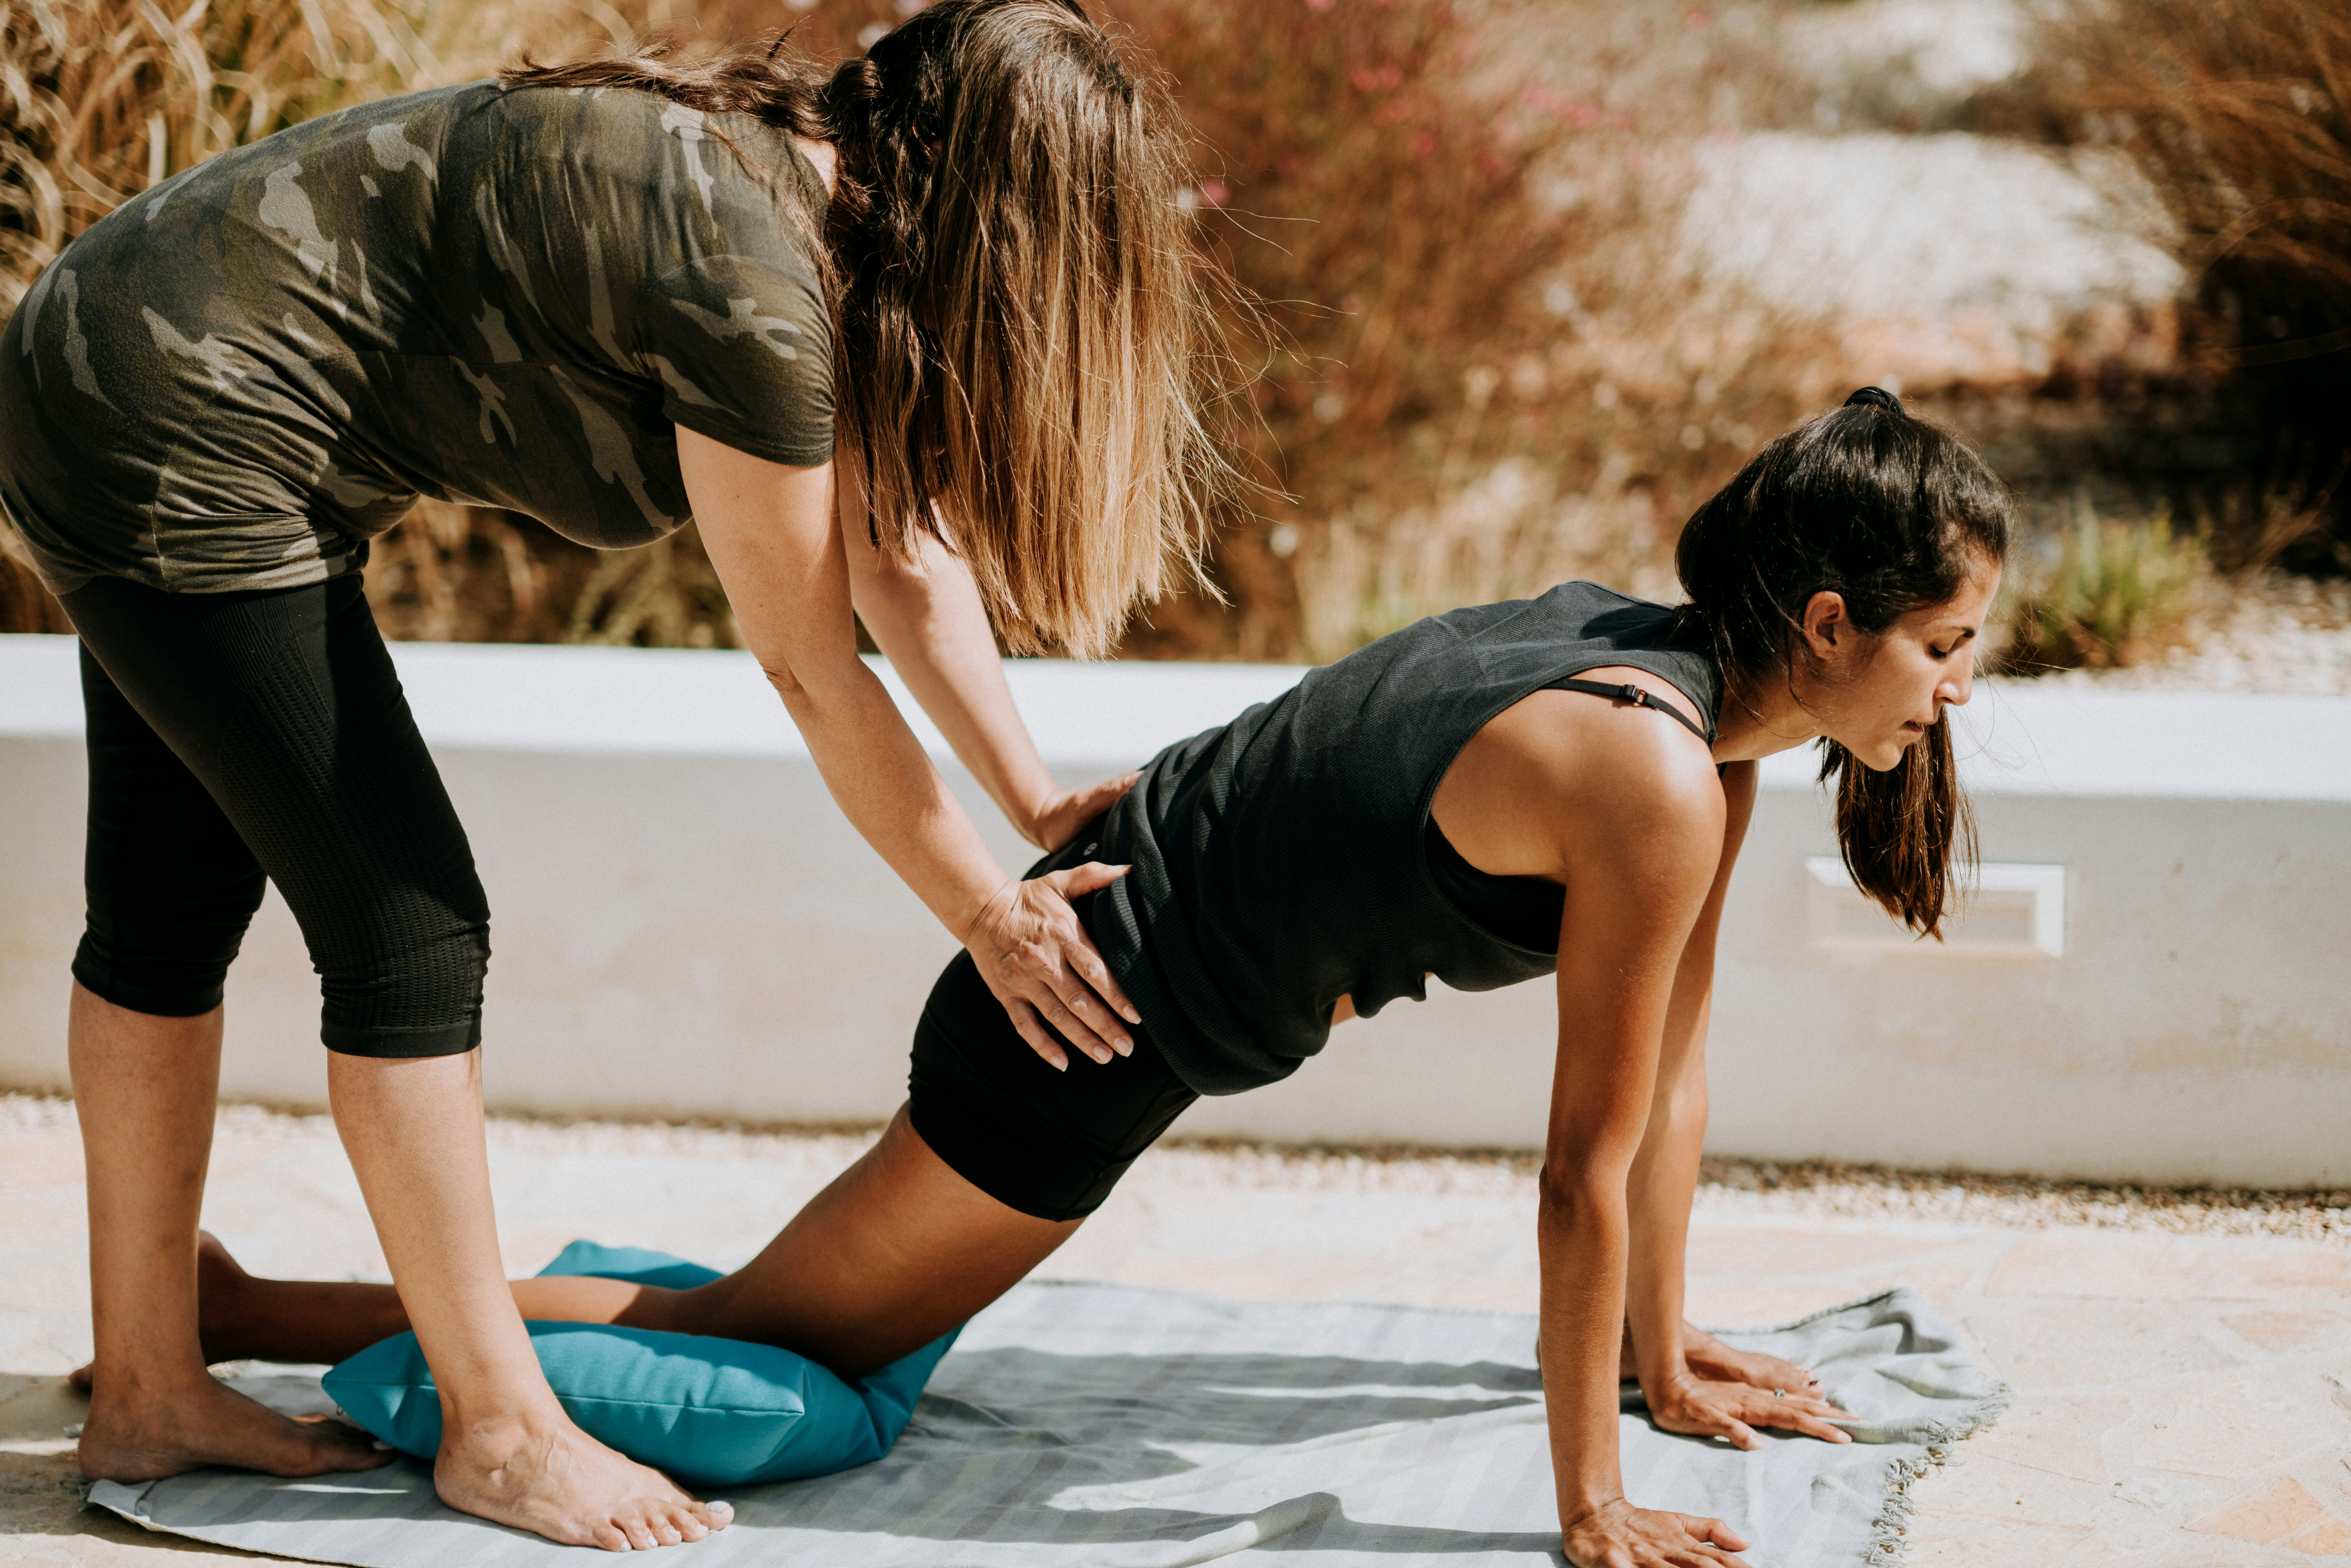 A woman helping another woman with a yoga pose